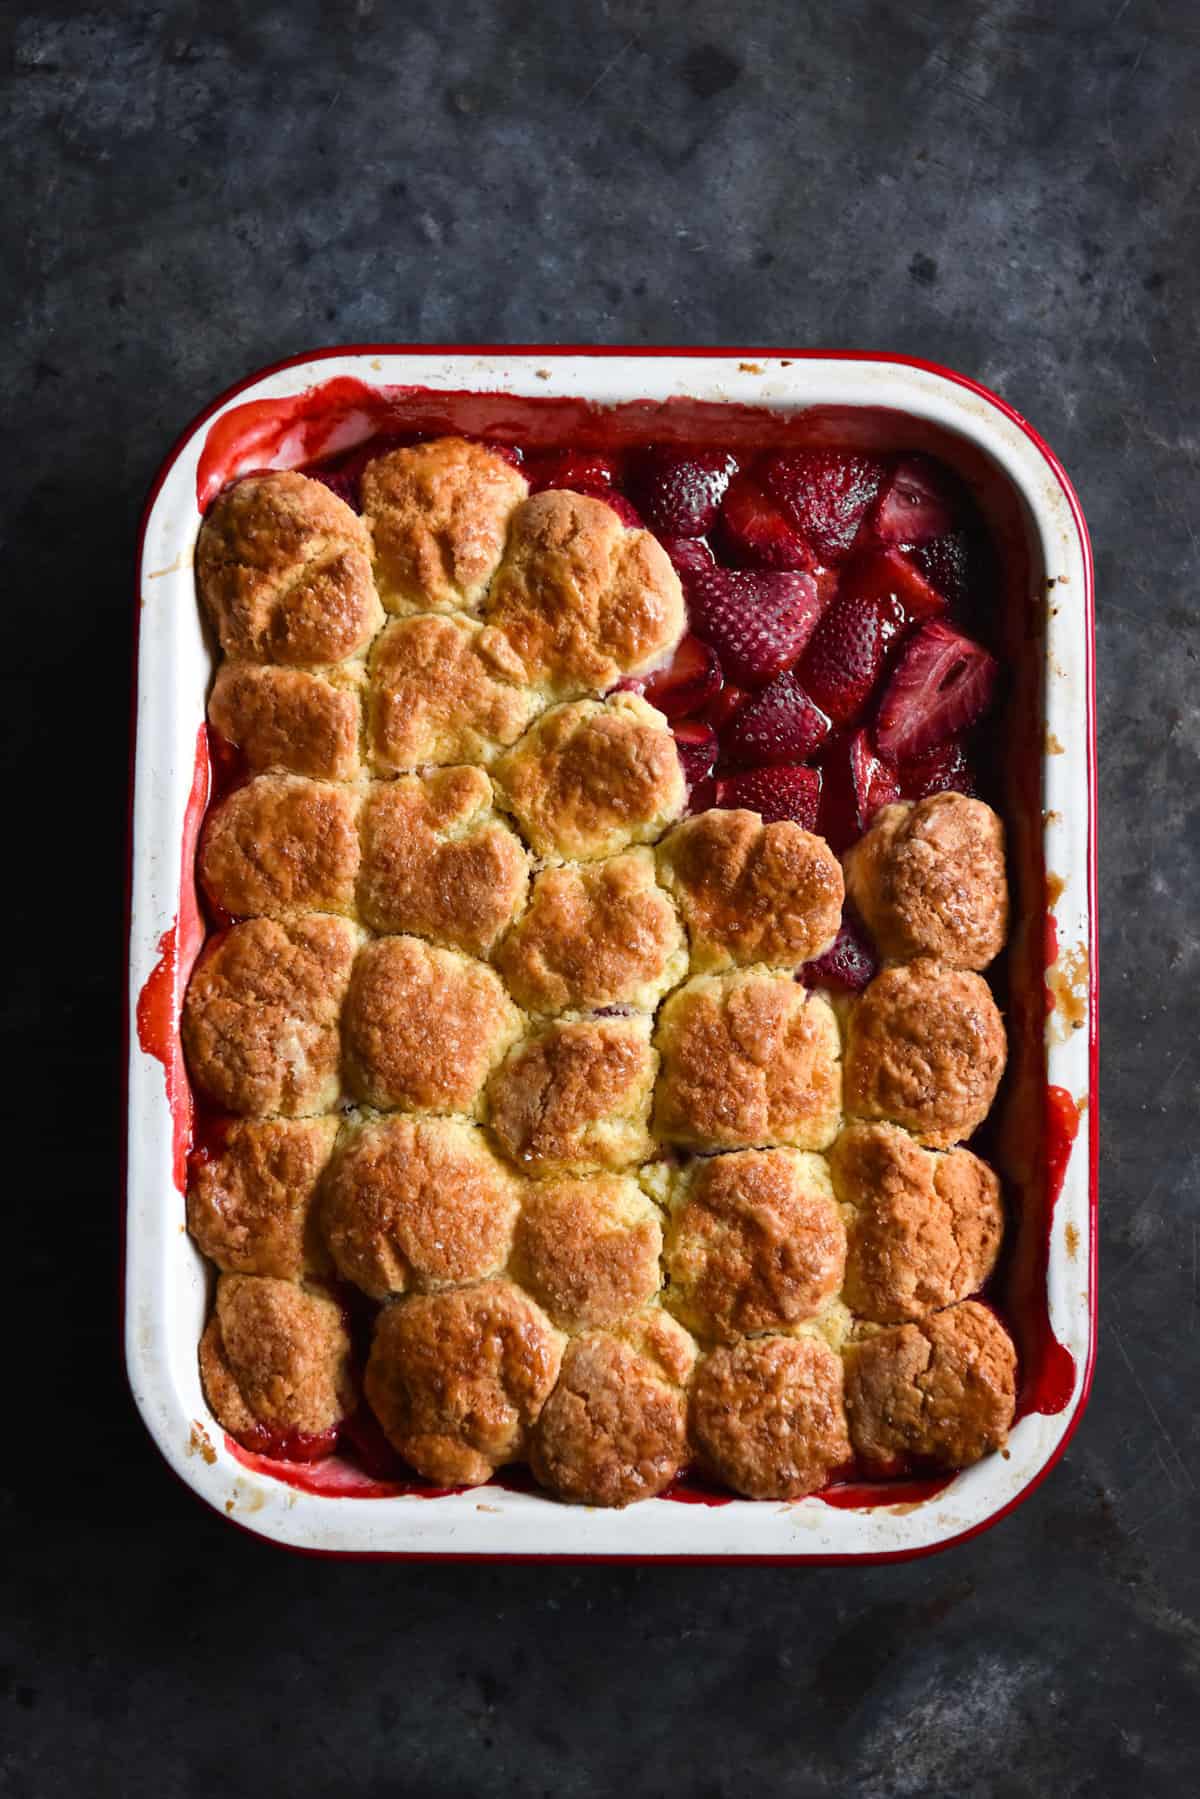 An aerial image of a gluten free cobbler on a dark blue backdrop. The cobbler has cobbler pieces removed from the top right corner, revealing the strawberries underneath.